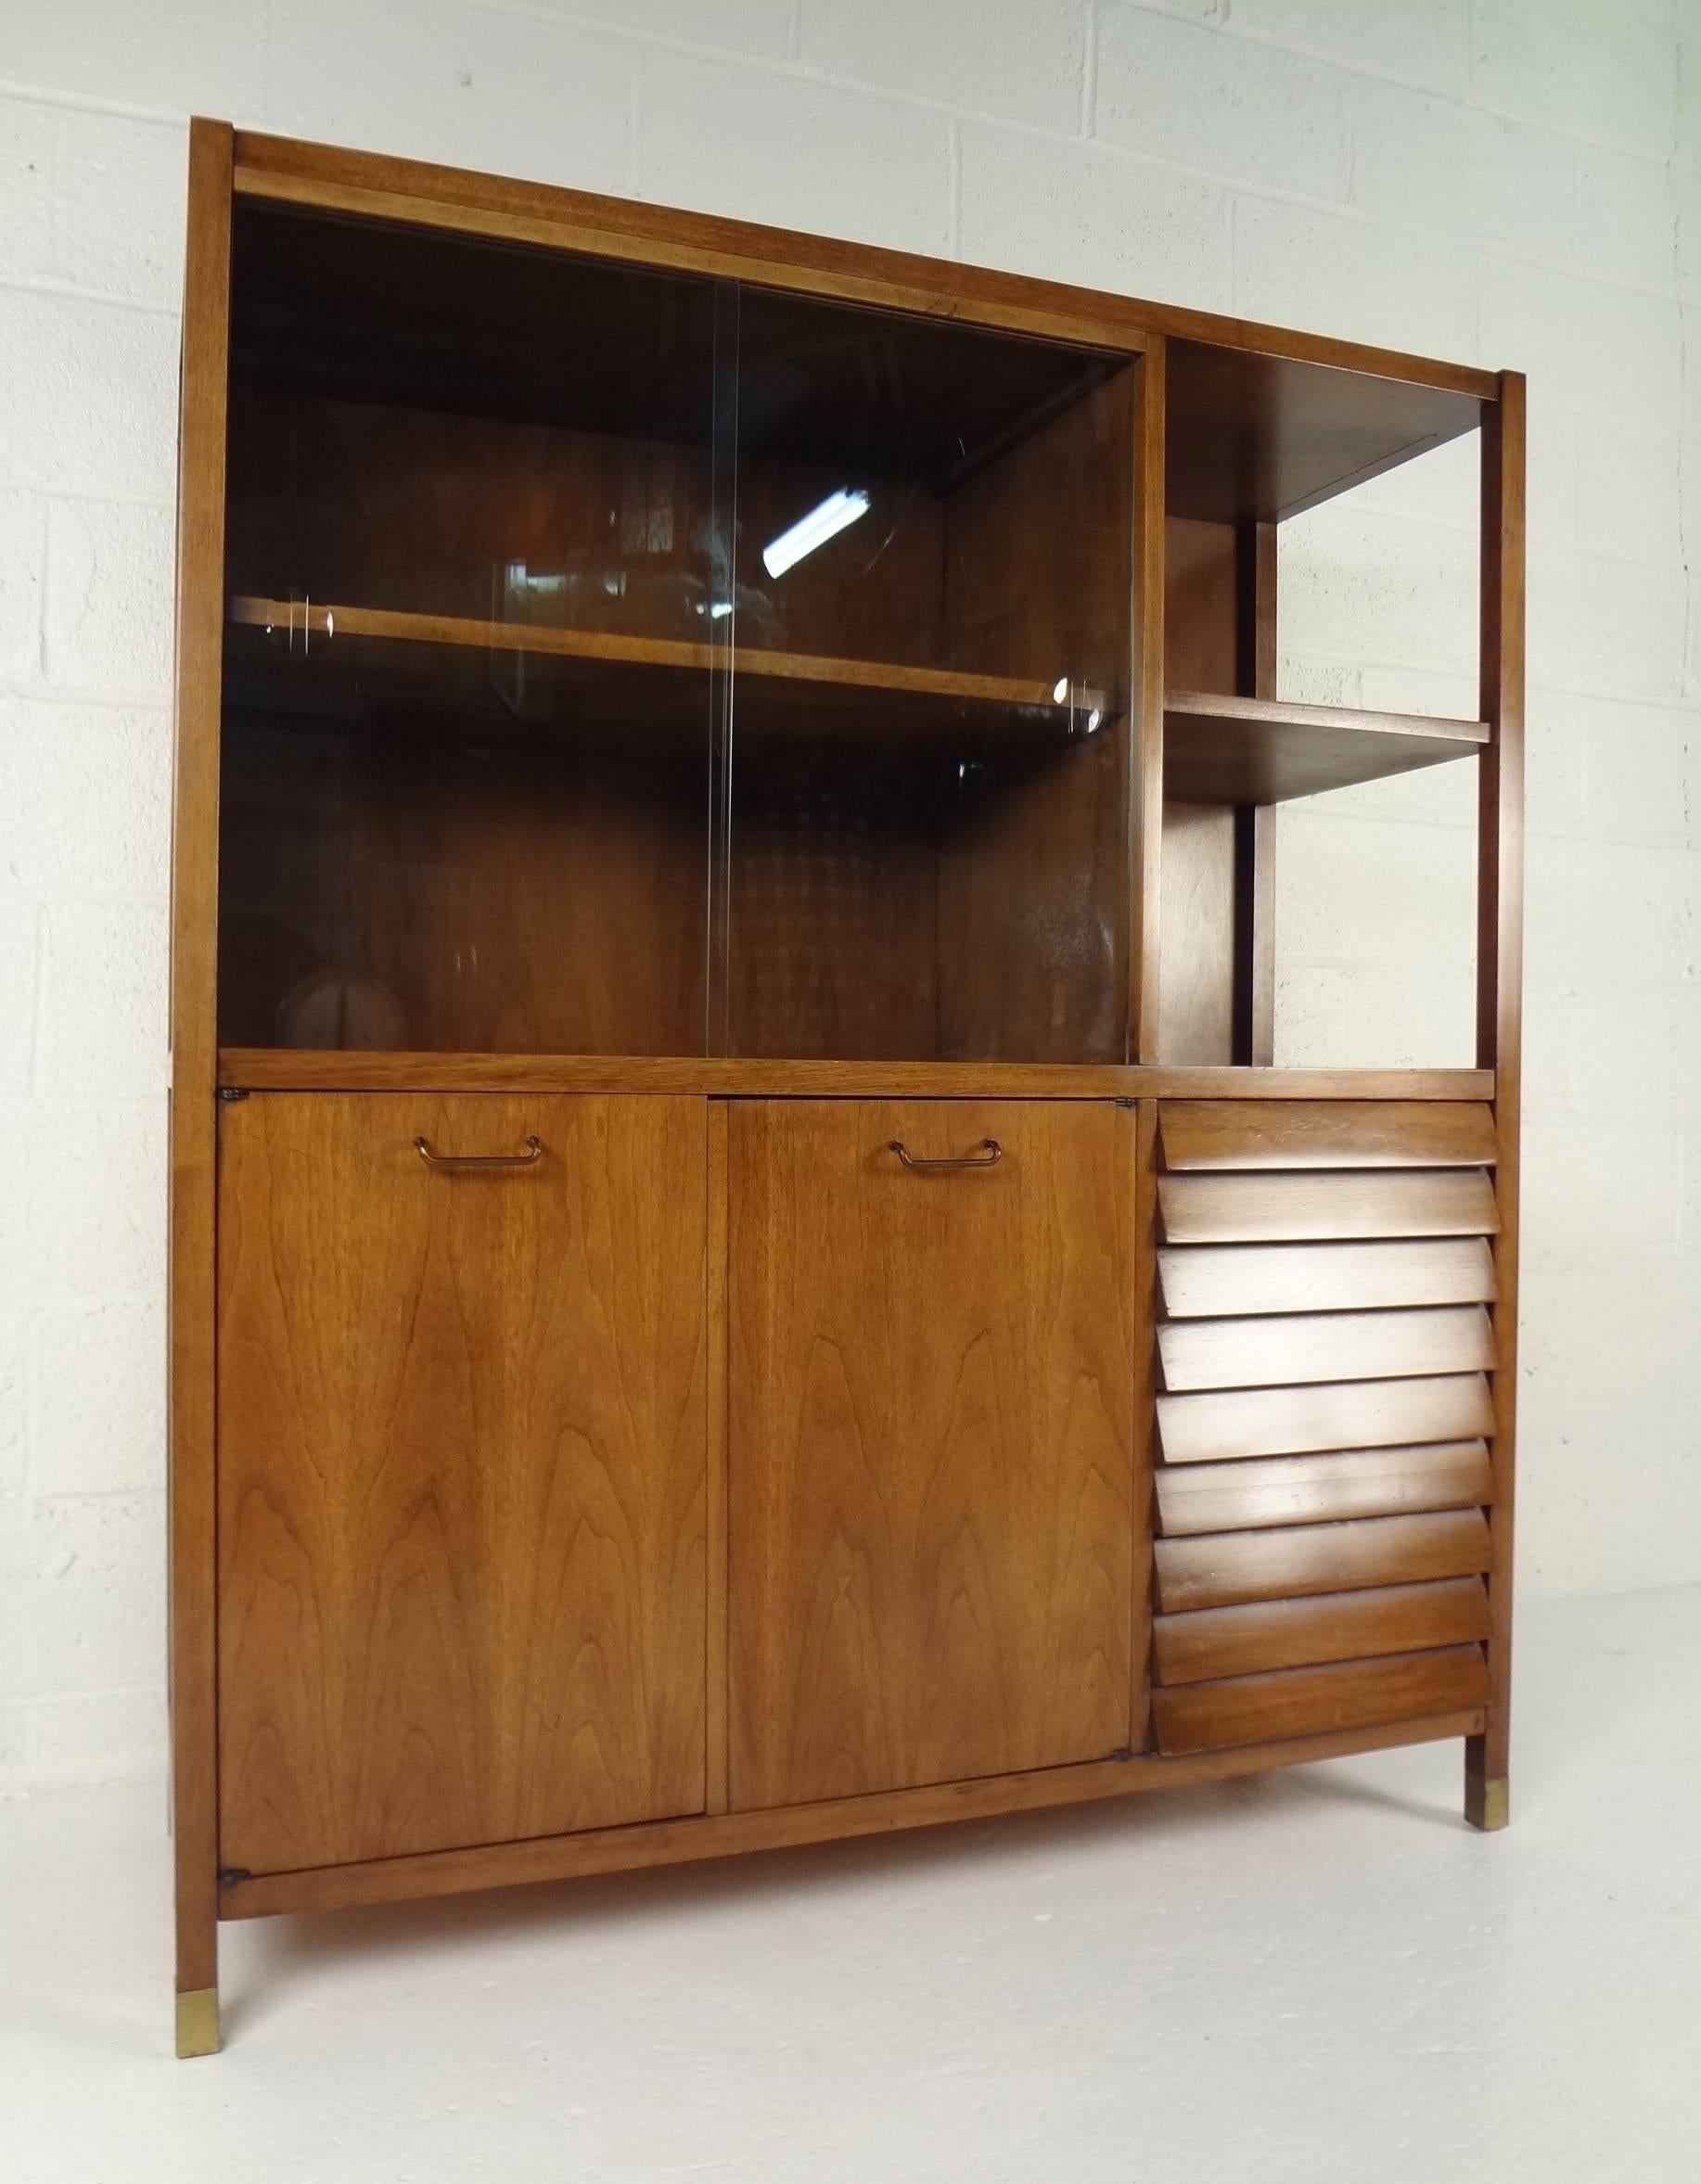 This elegant vintage modern hutch features plenty of room for storage and displaying items. Sleek design has a large compartment on top with a shelf and sliding glass doors in front. Unique design has an open display area on the left side with two